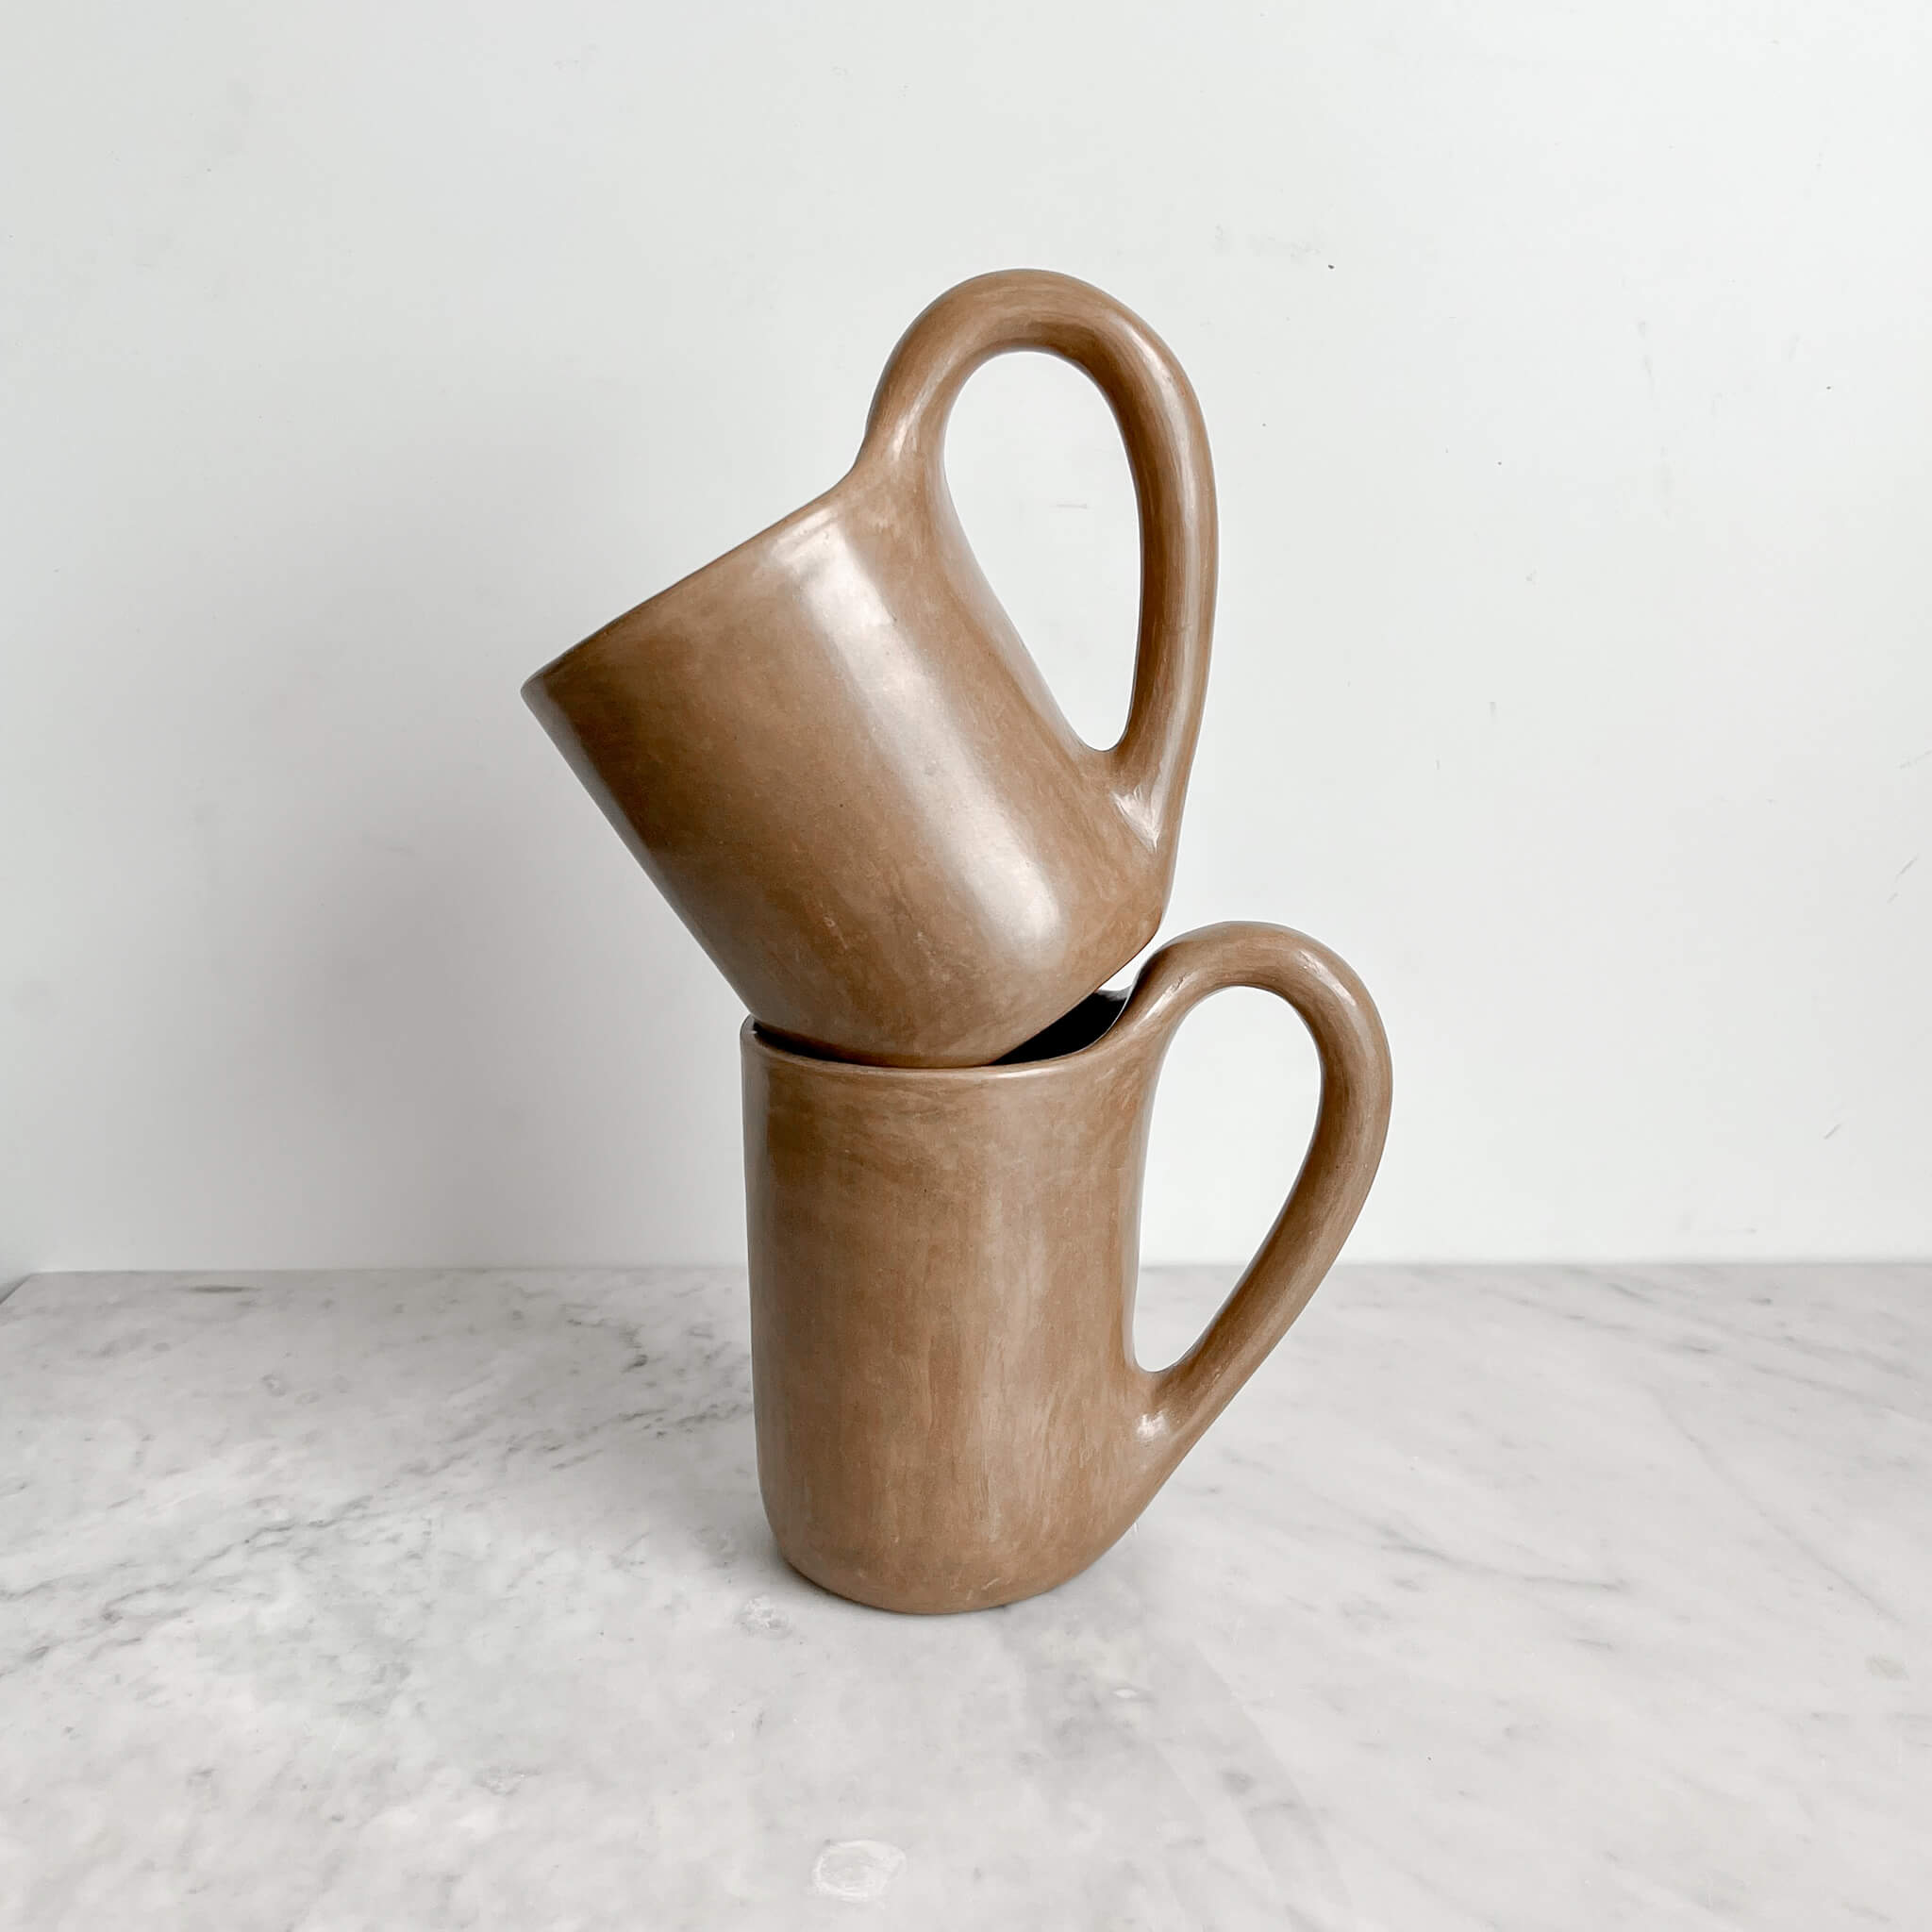 A stacked set of 2 Calapa beige clay mugs made in Mexico.